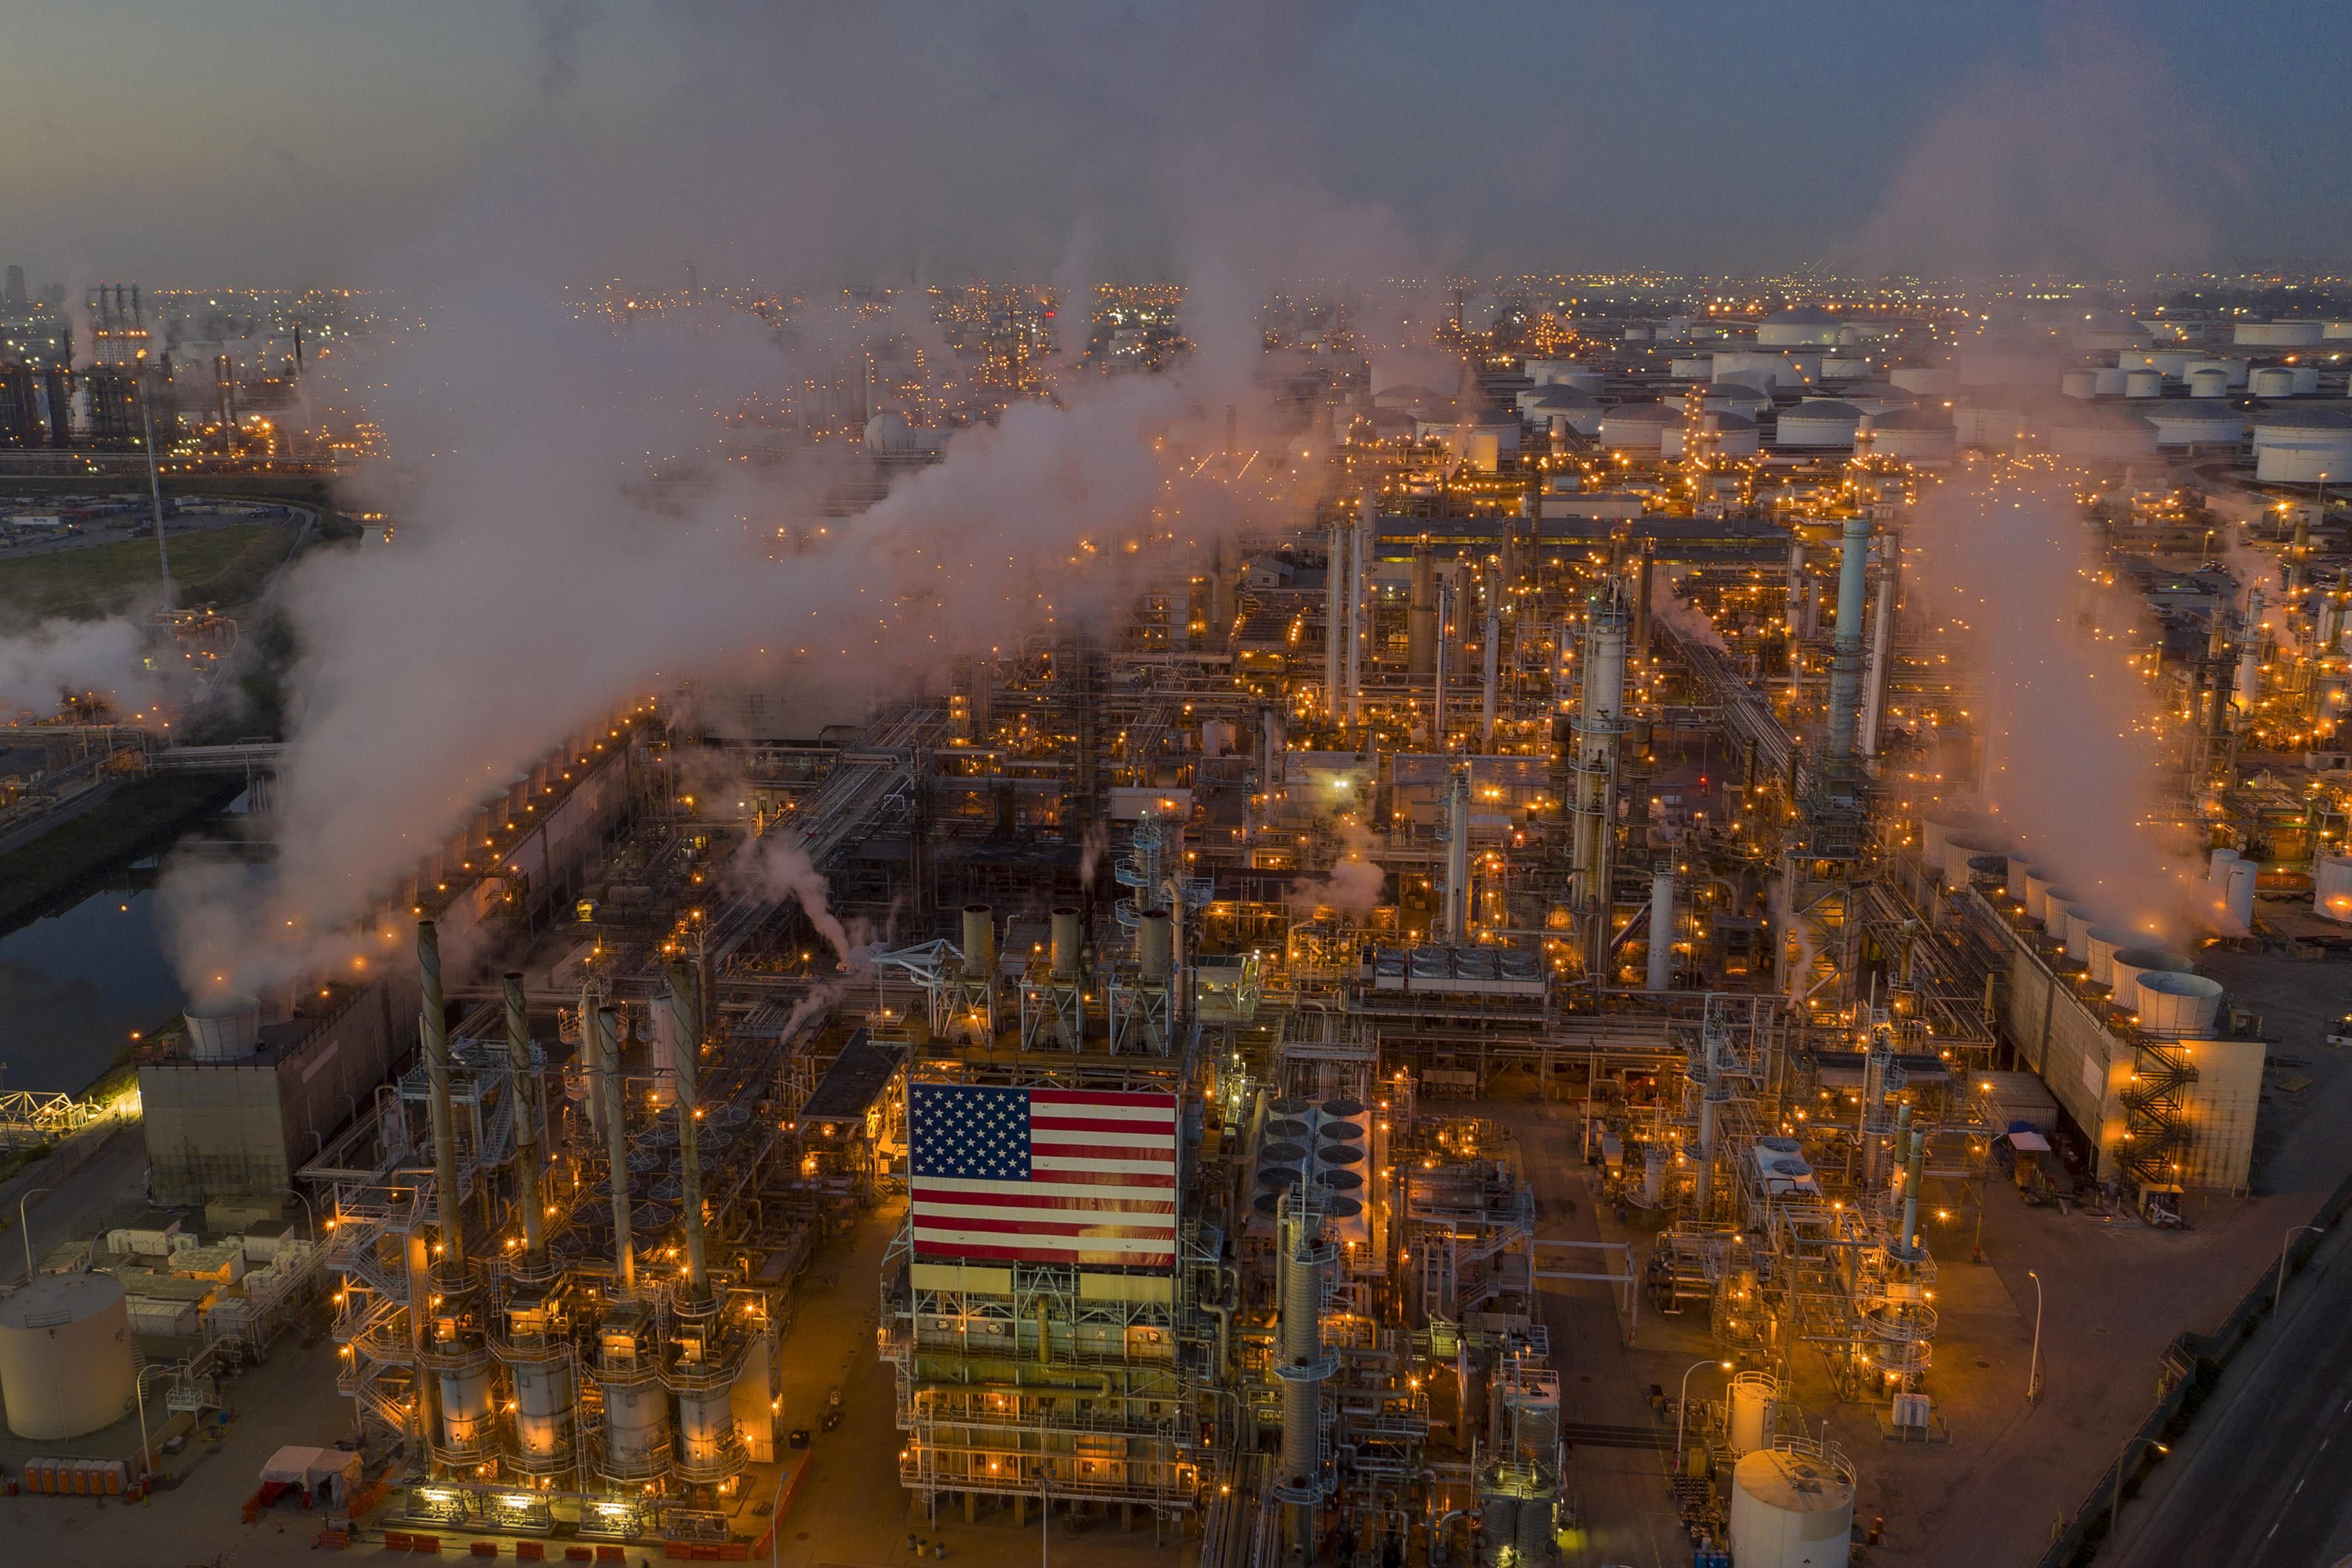 Oil refinery seen from above